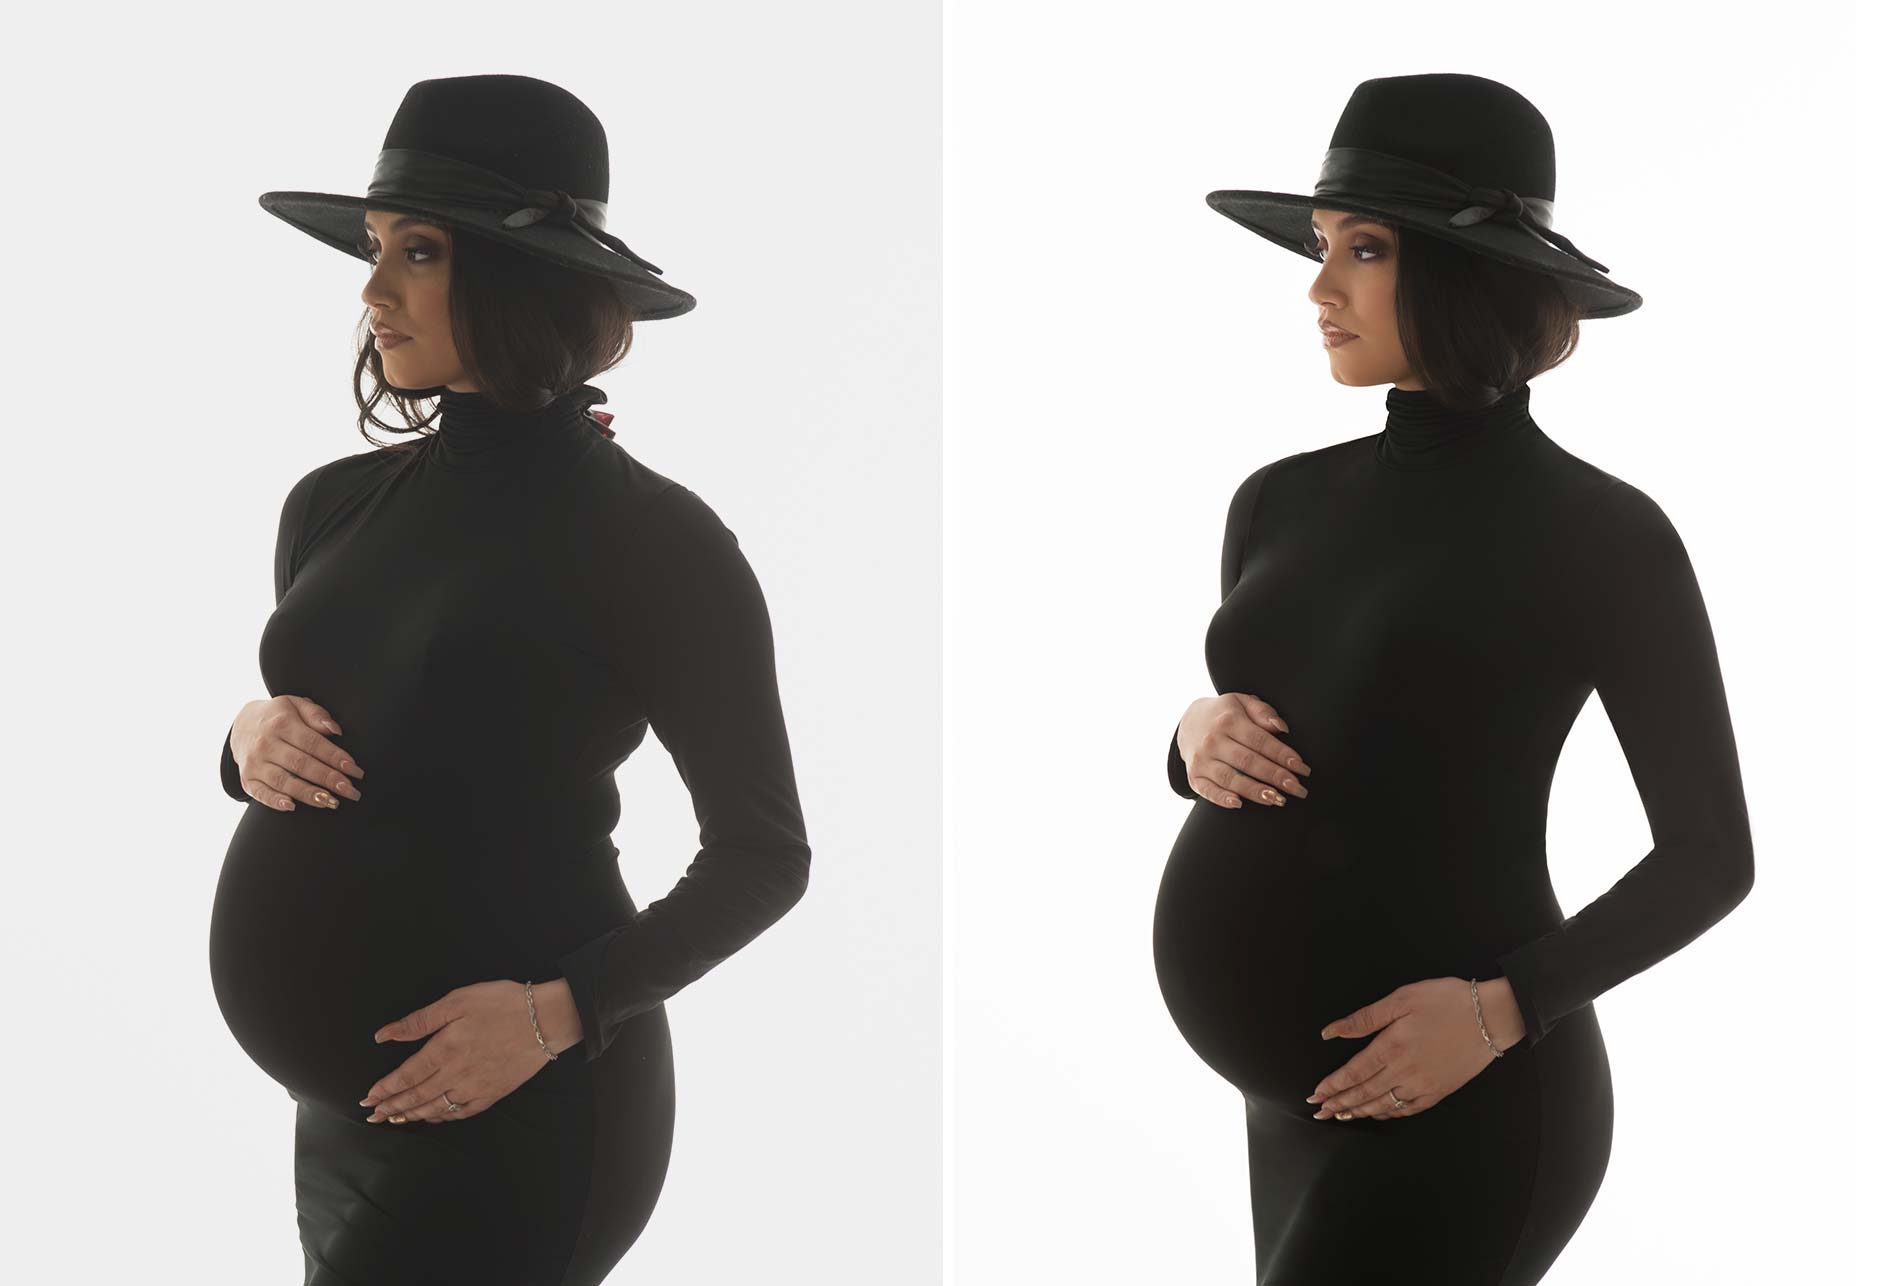 Black dress and hat worn by a pregnant woman in NYC